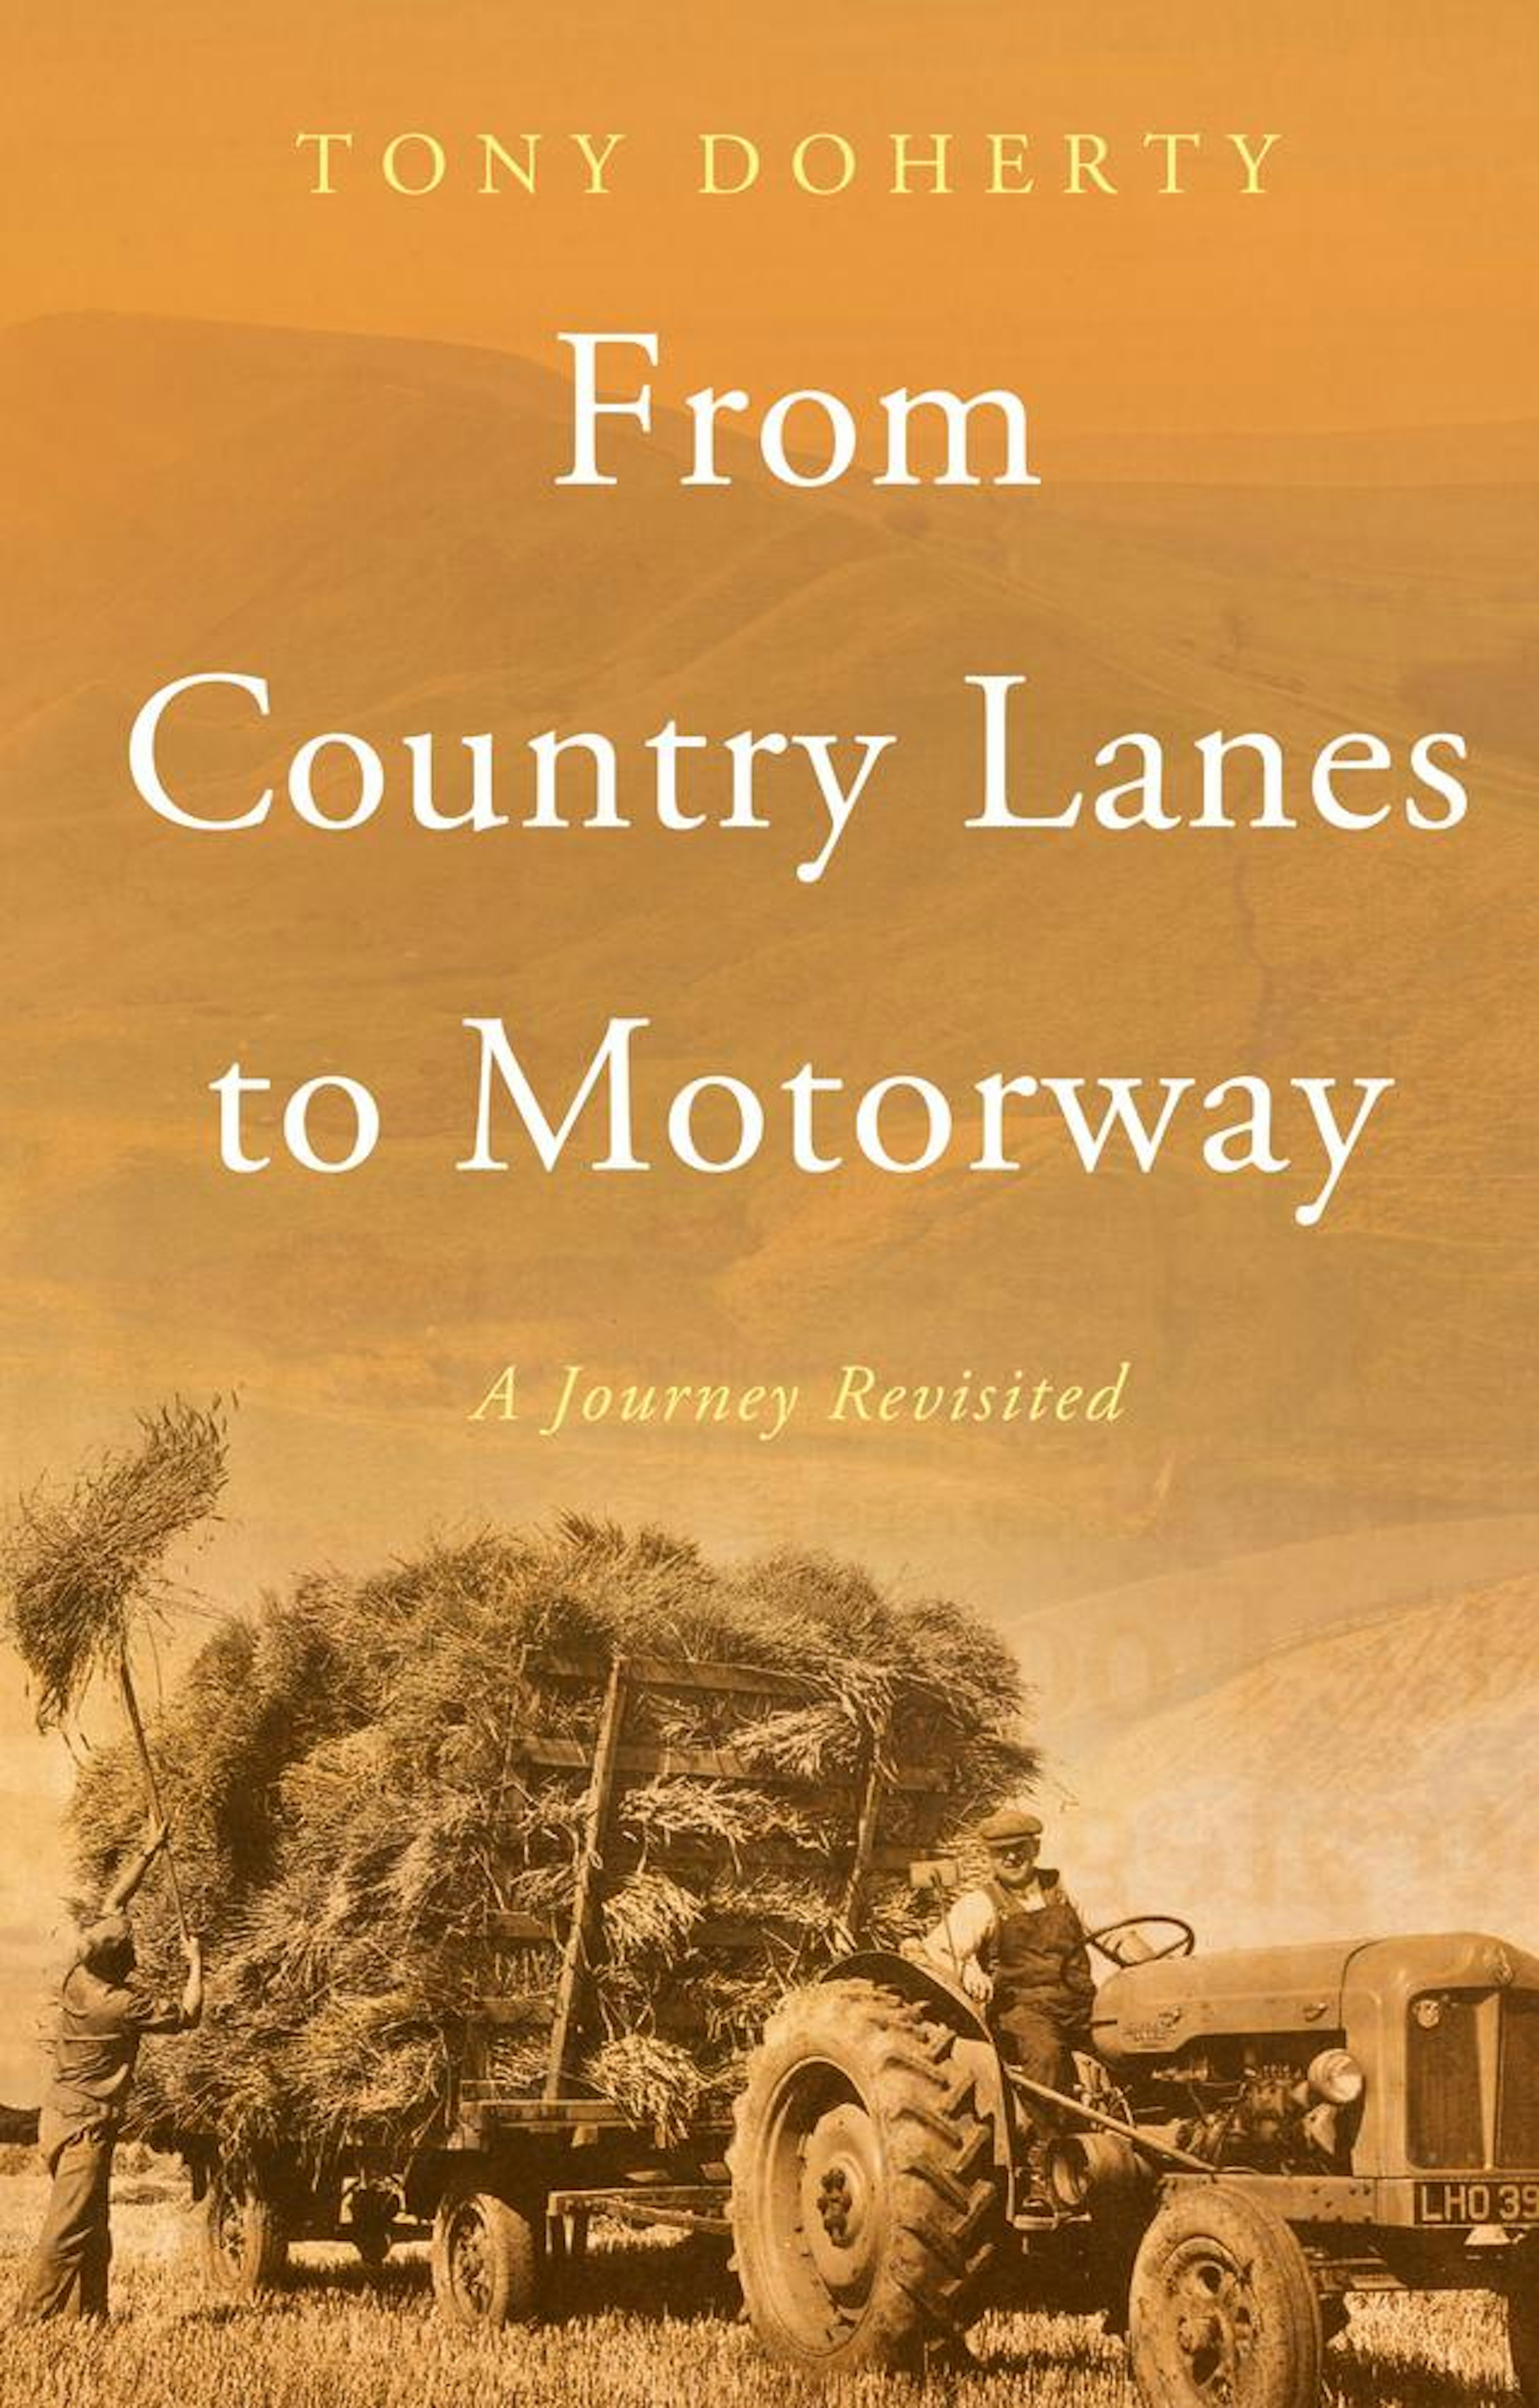 From Country Lanes to Motorway